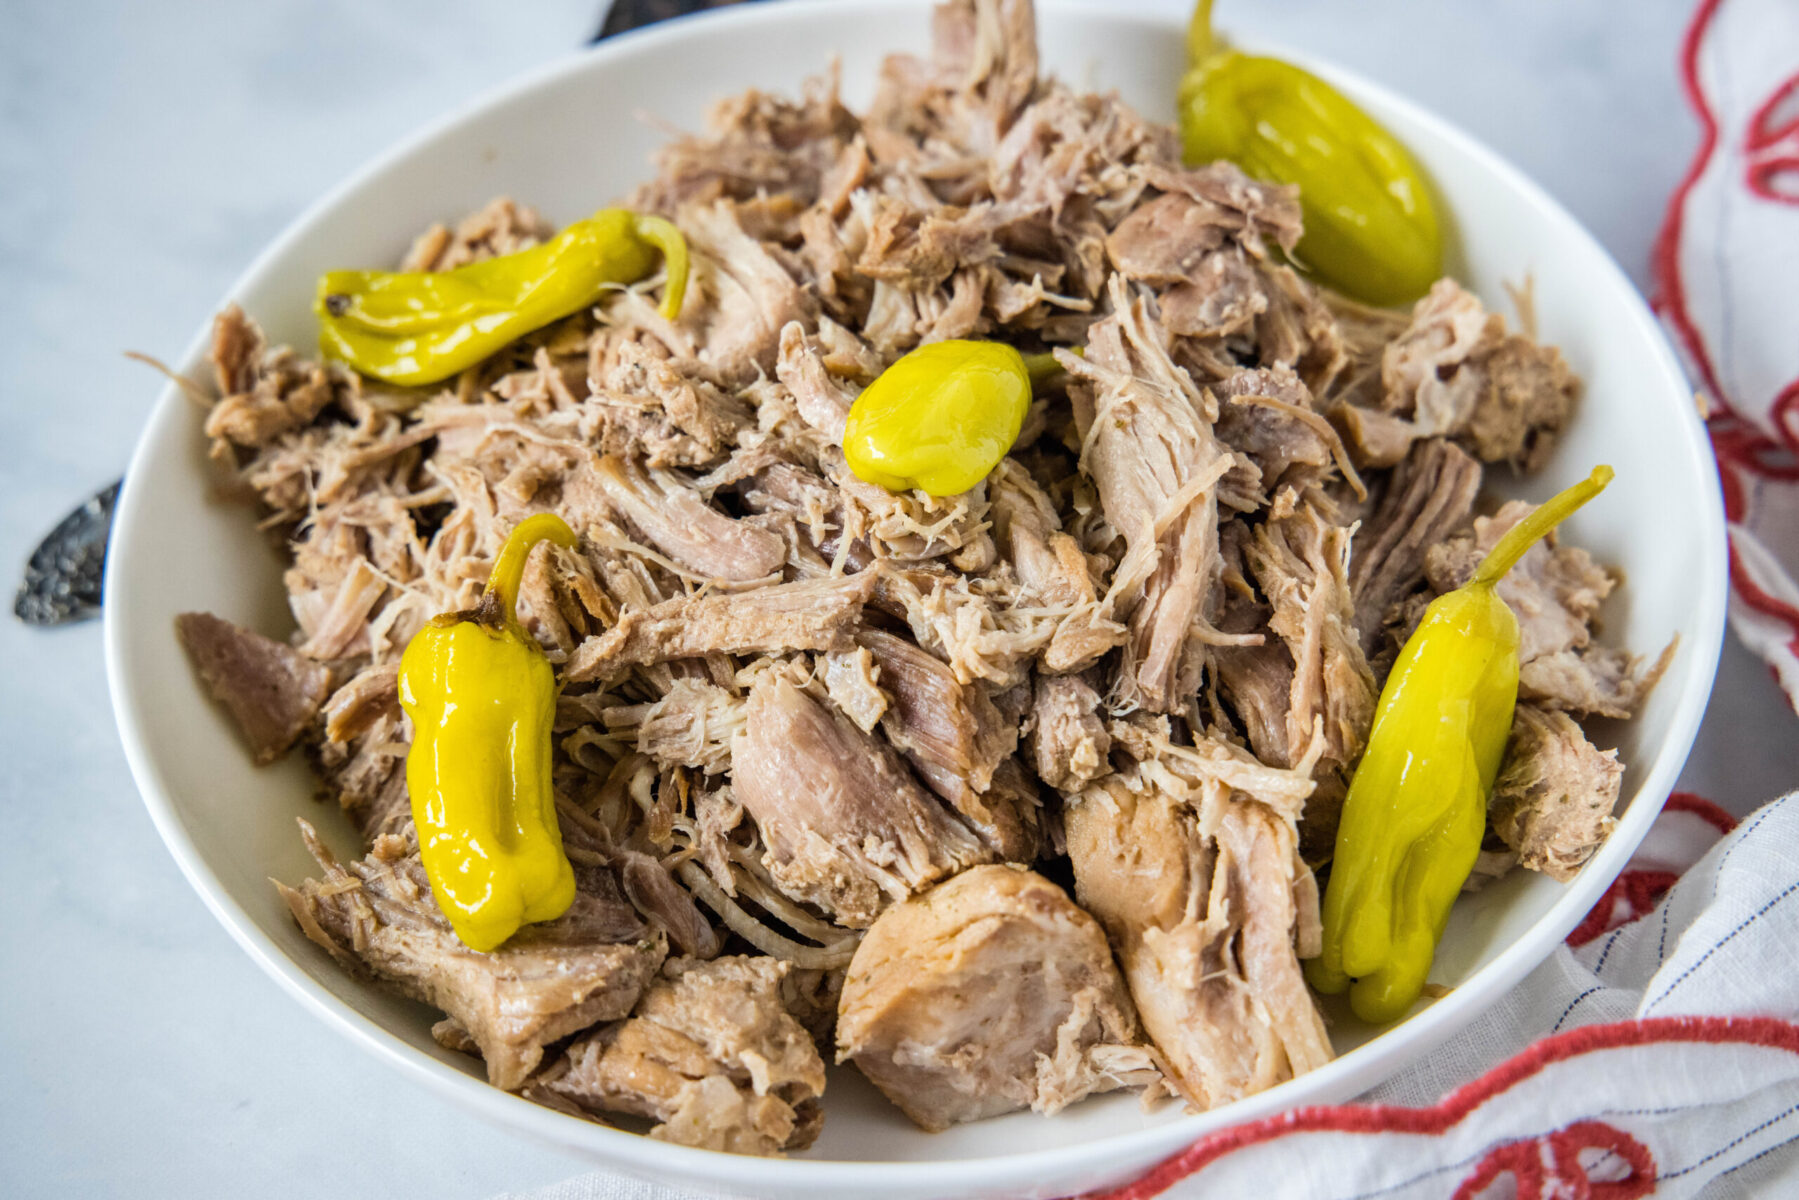 A bowl full of shredded pork with pepperoncini peppers